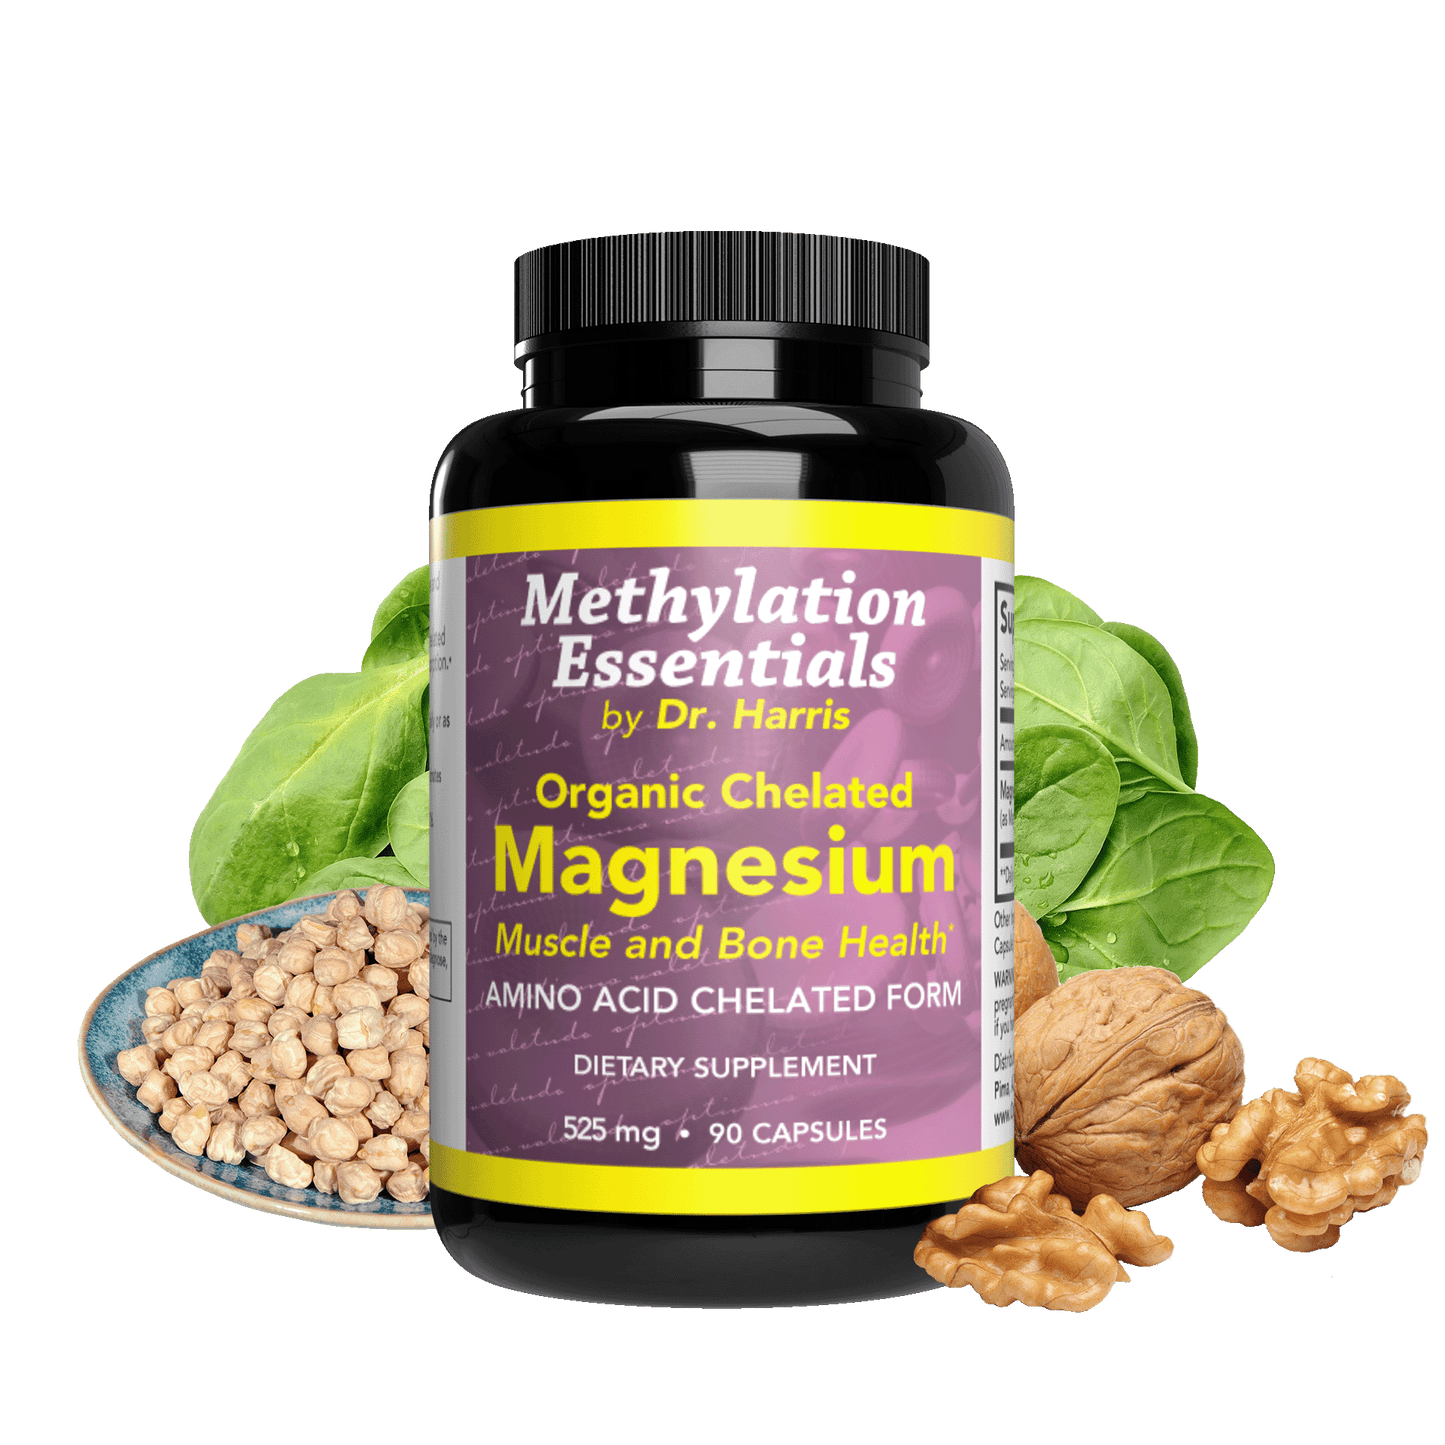 The image of a bottle of Essentials Magnesium. is walnuts, chickpeas, and spinach.